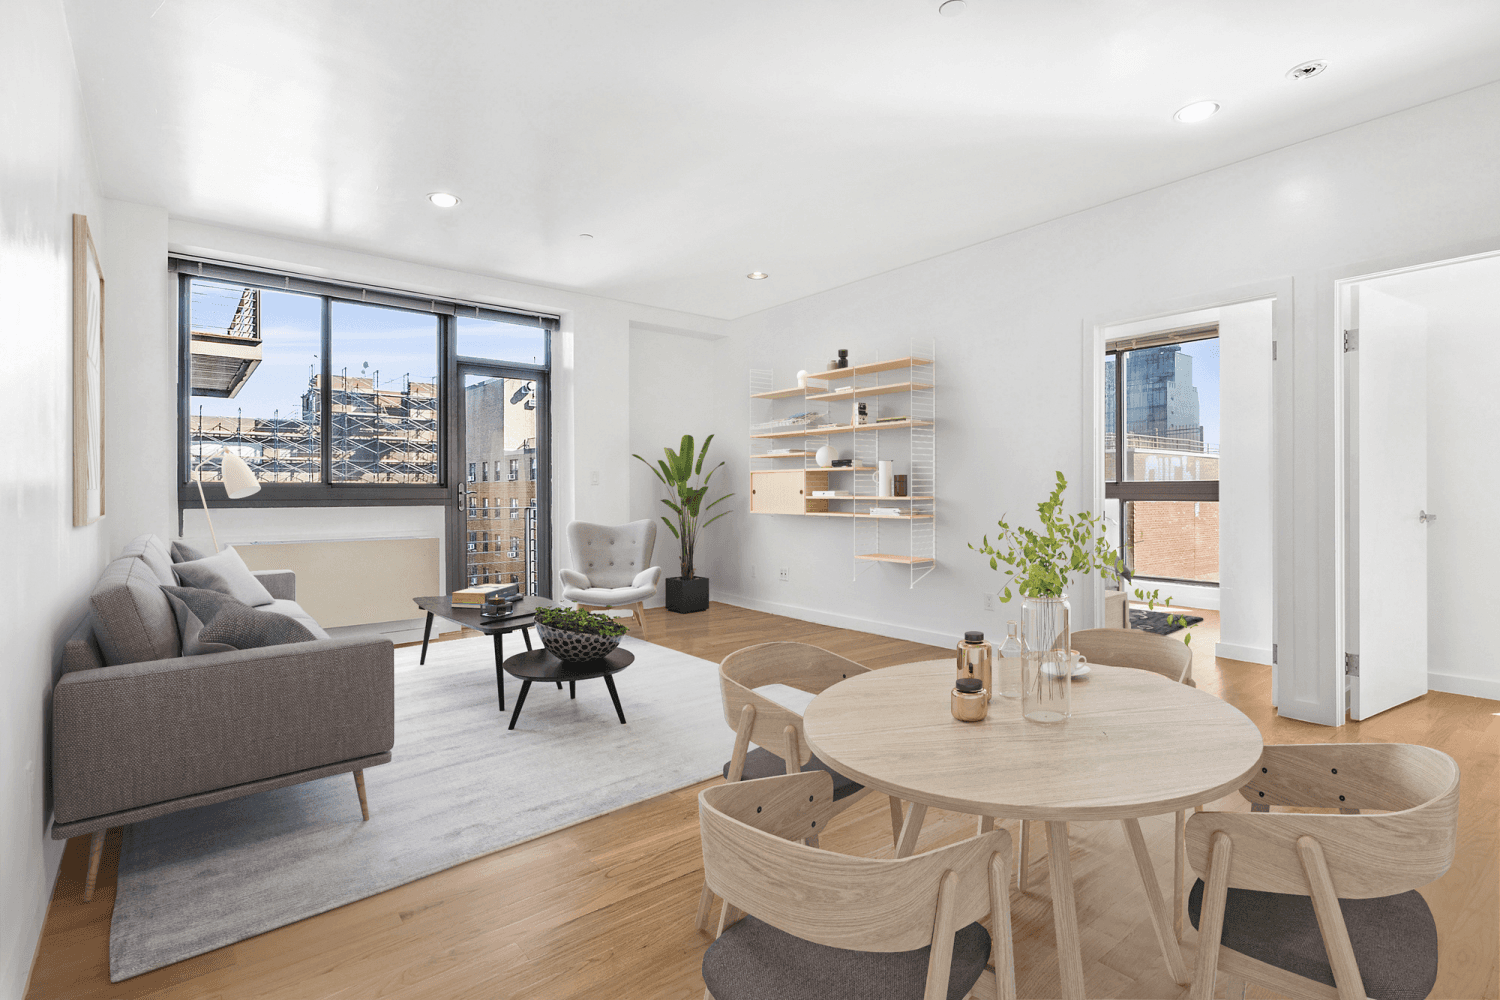 Perched on a sunny corner in the sky with quiet North East views, 38 Delancey is a condominium in the center of the Lower East Side and a block from ...